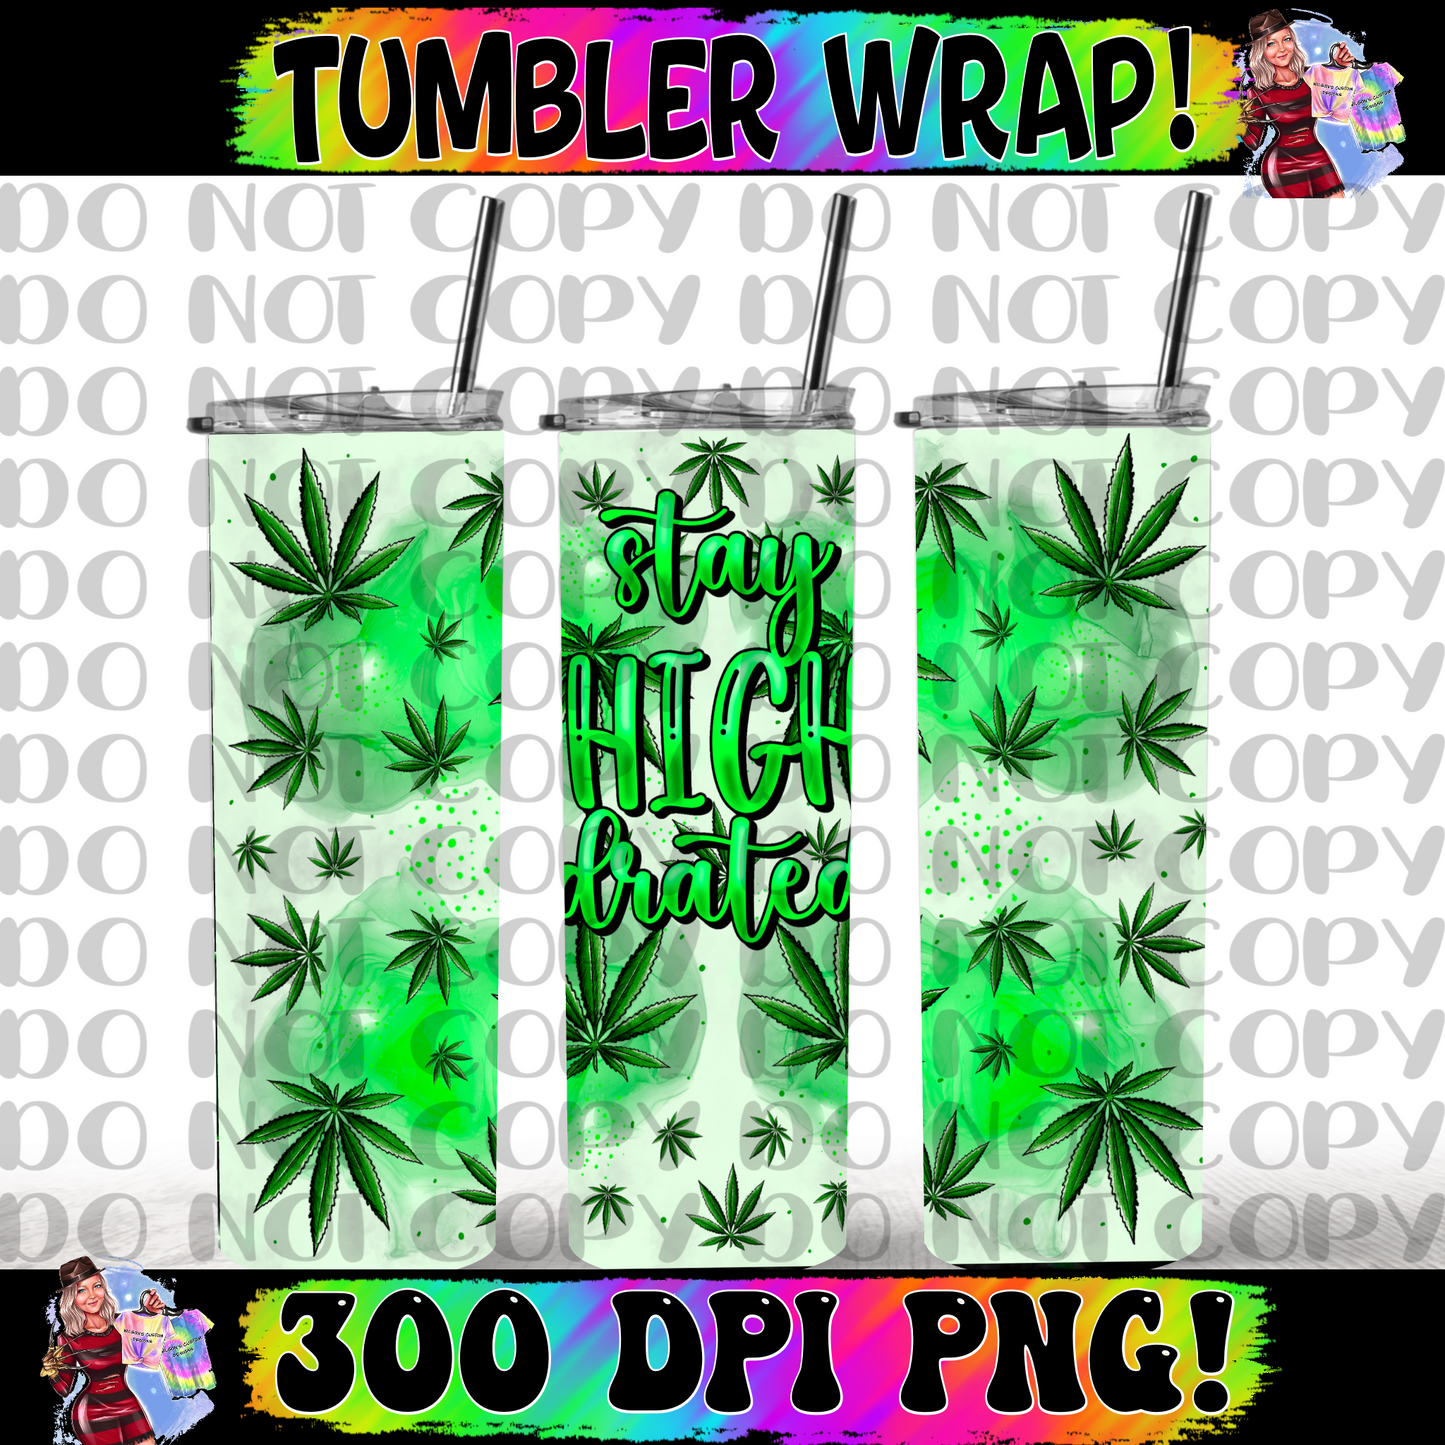 Stay high-drated tumbler wrap